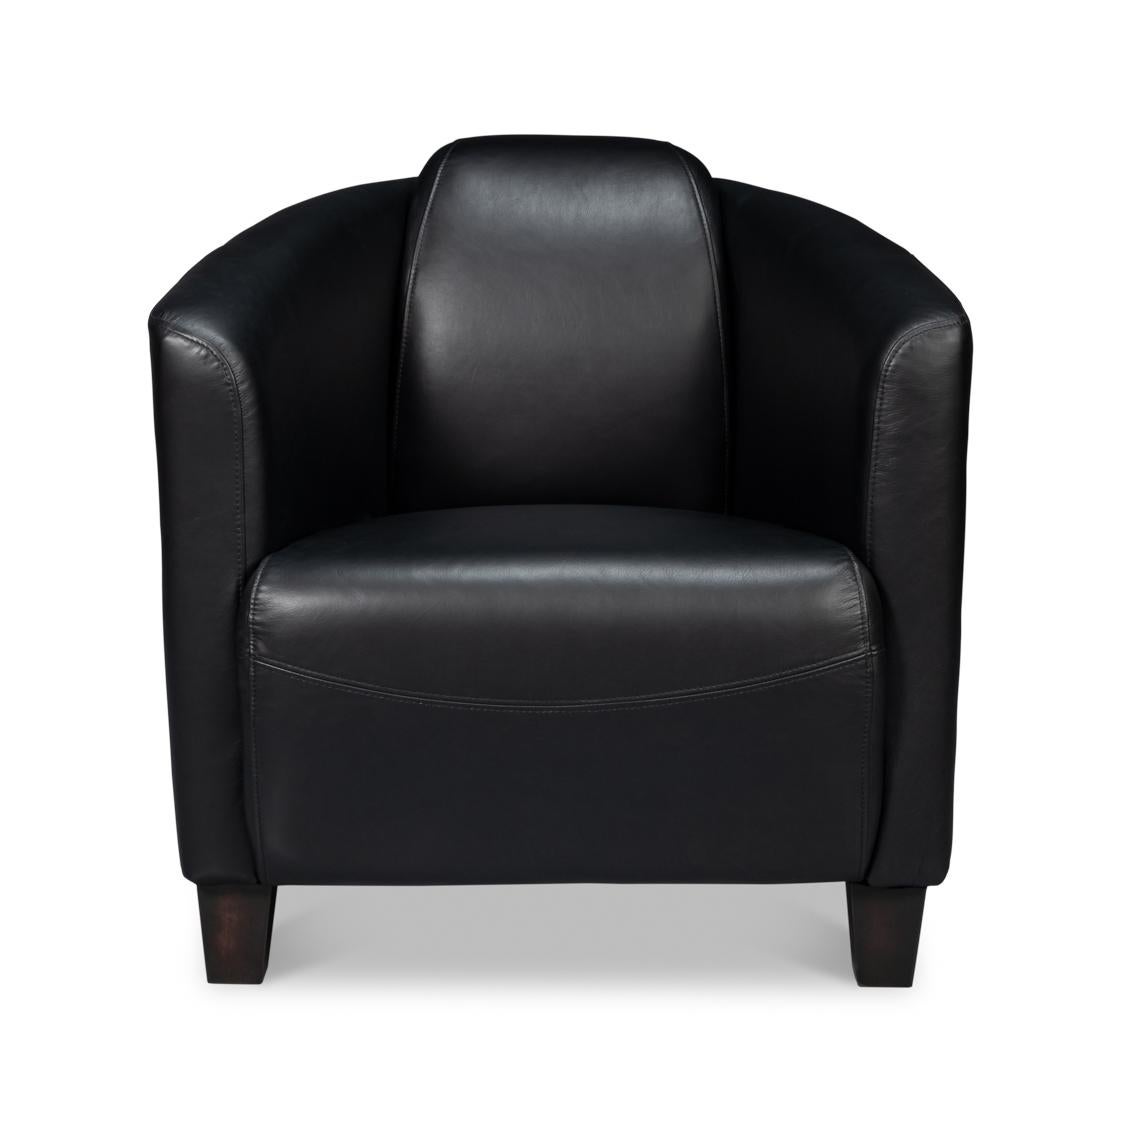 Crafted of luxurious top-grain leather in simple black, this stylish and comfortable chair is perfect for your den, library, or living room.
Color variation is common and acceptable on vintage leather.
Dimensions: 28